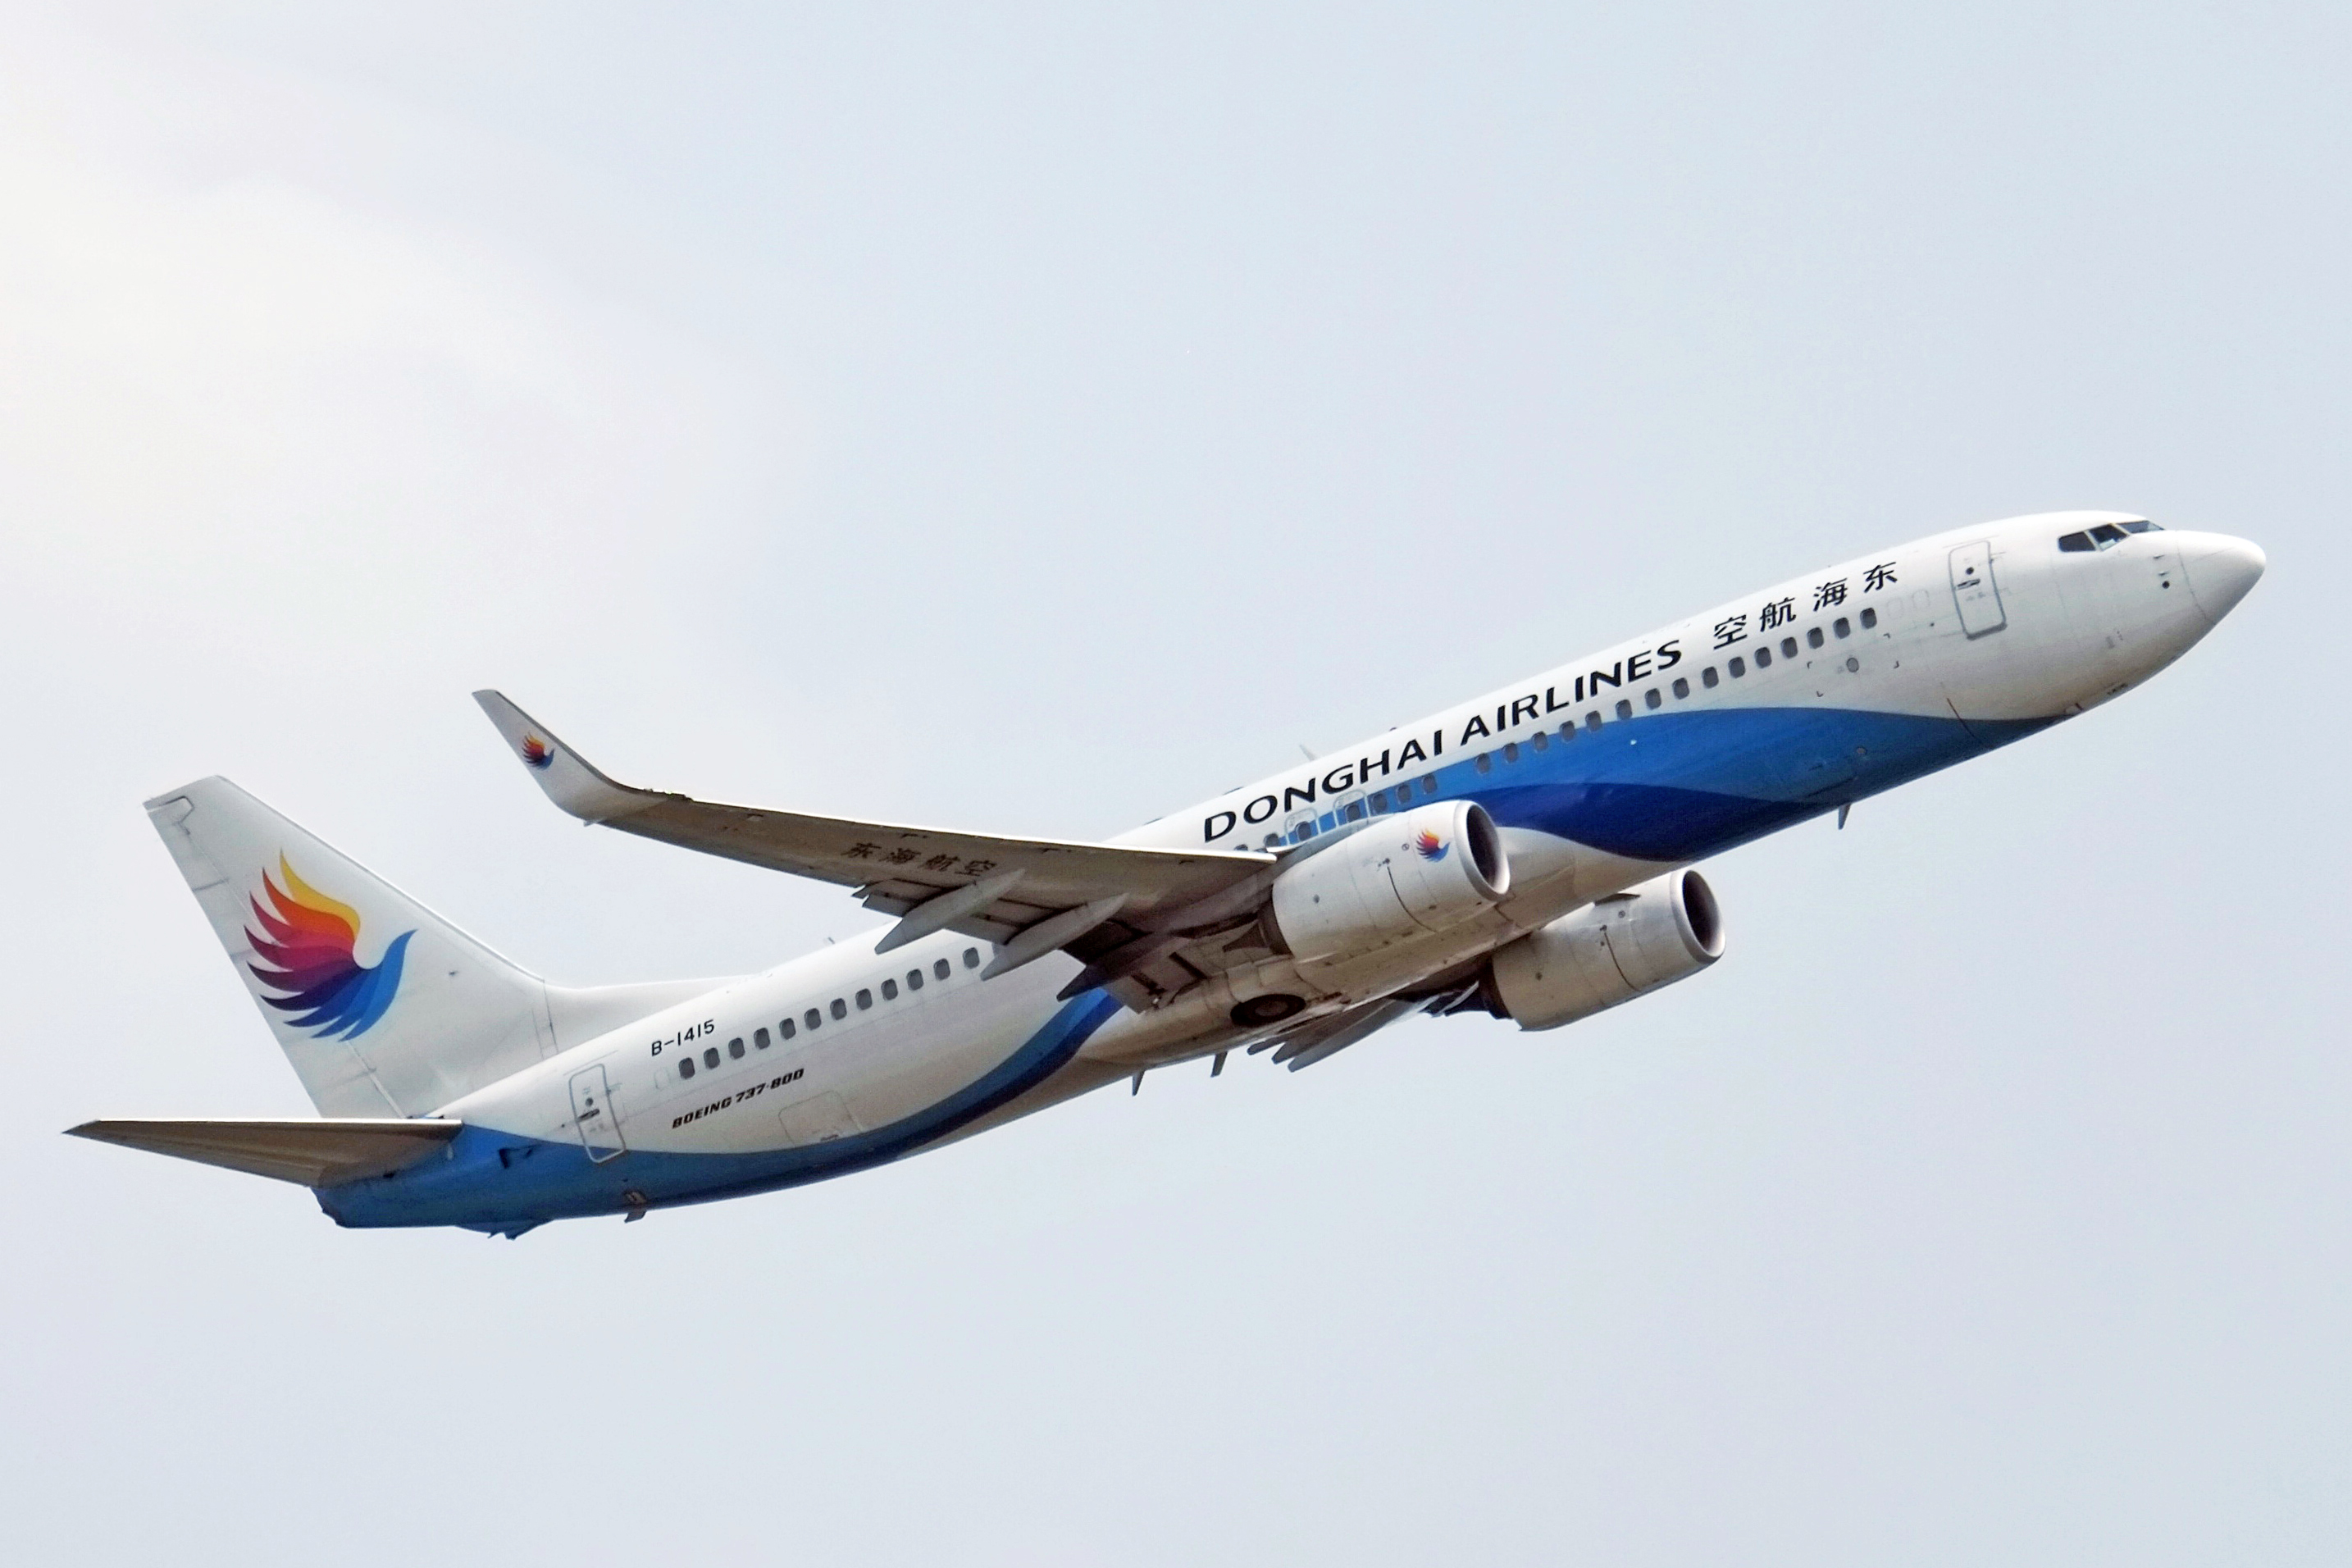 A file image of a Donghai Airlines Boeing 737-800. (Windmemories/Wikimedia Commons)